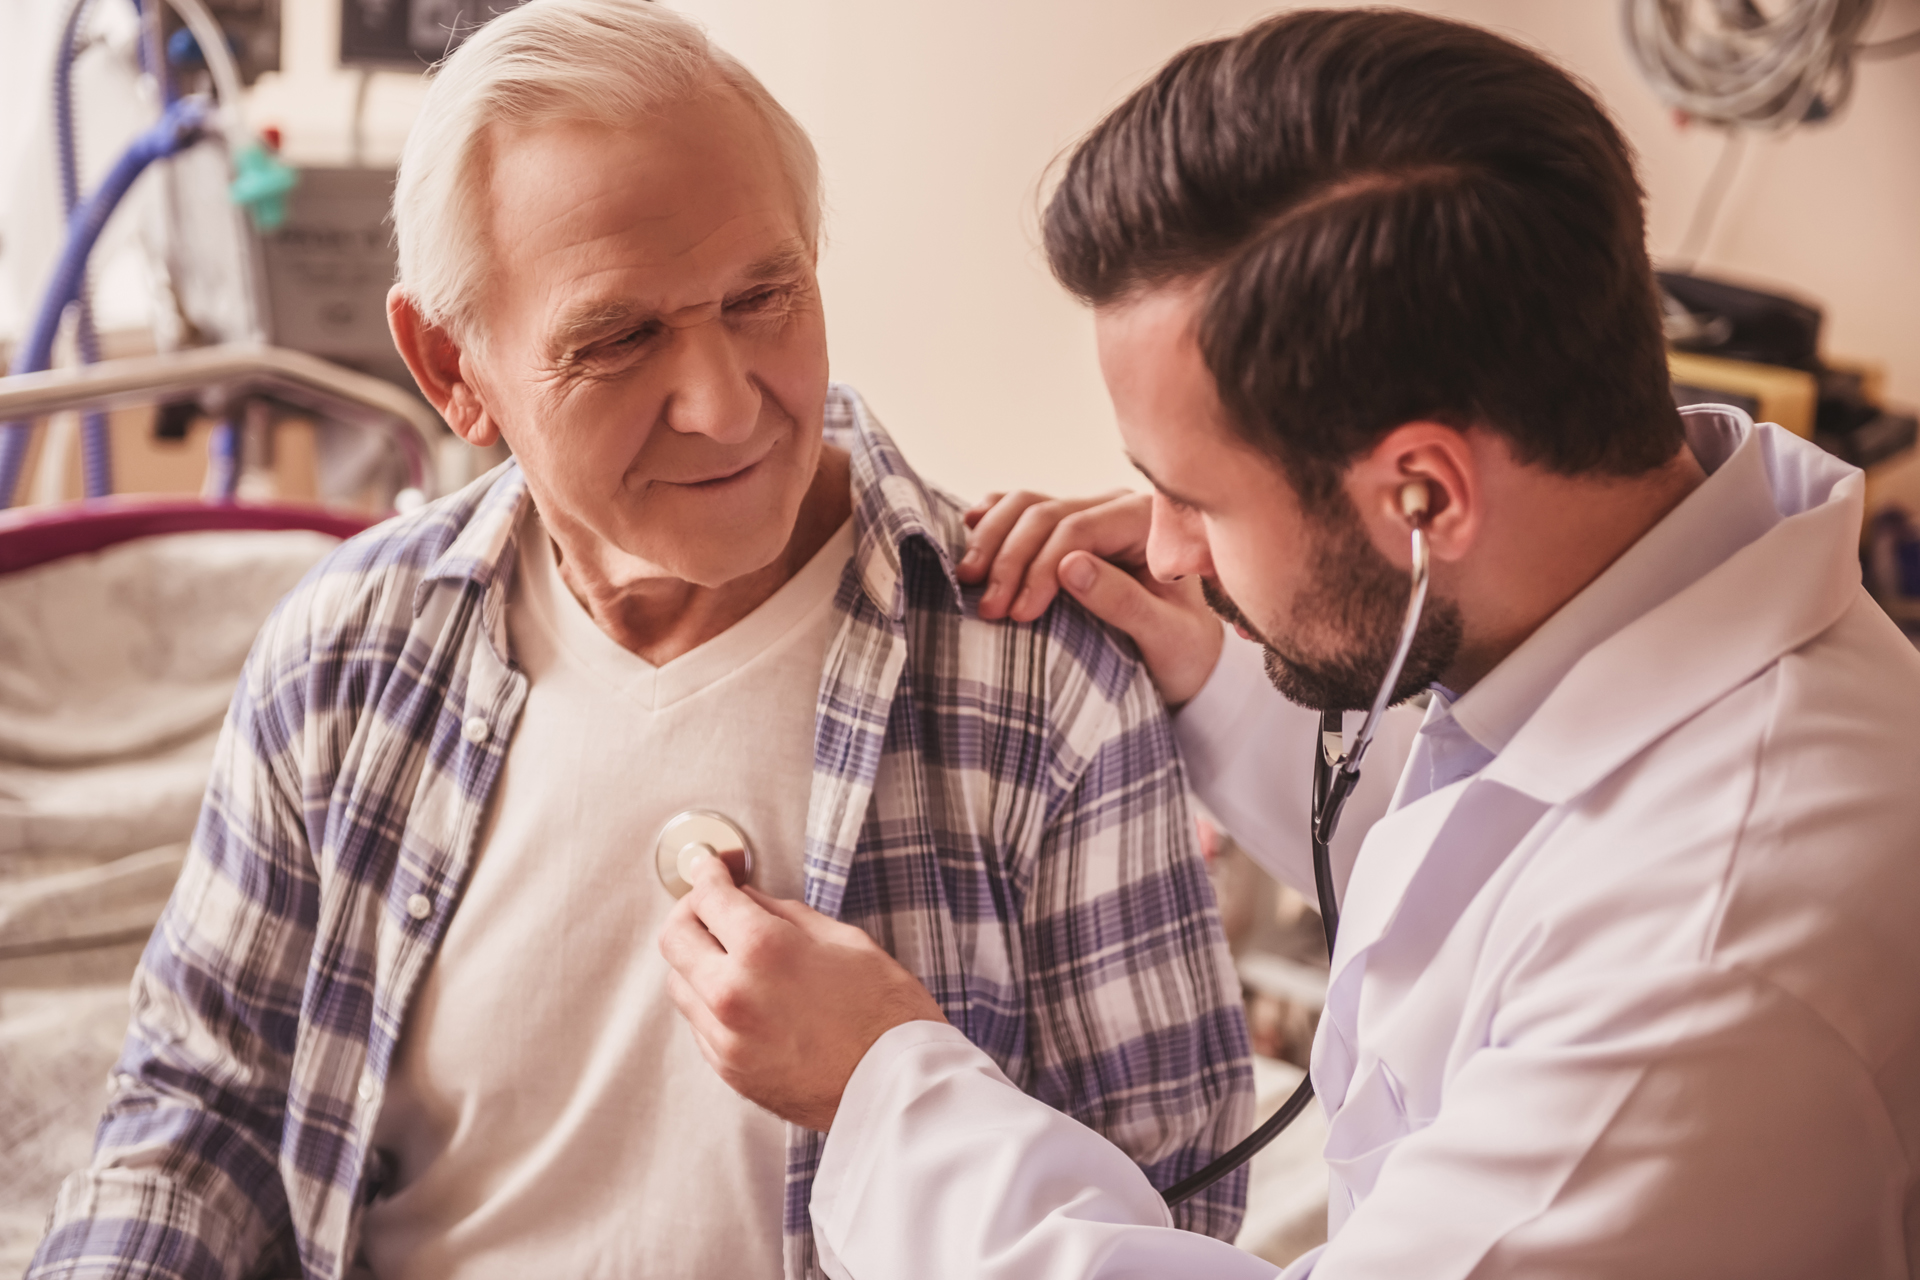 Older gentleman getting physical exam at doctor's office